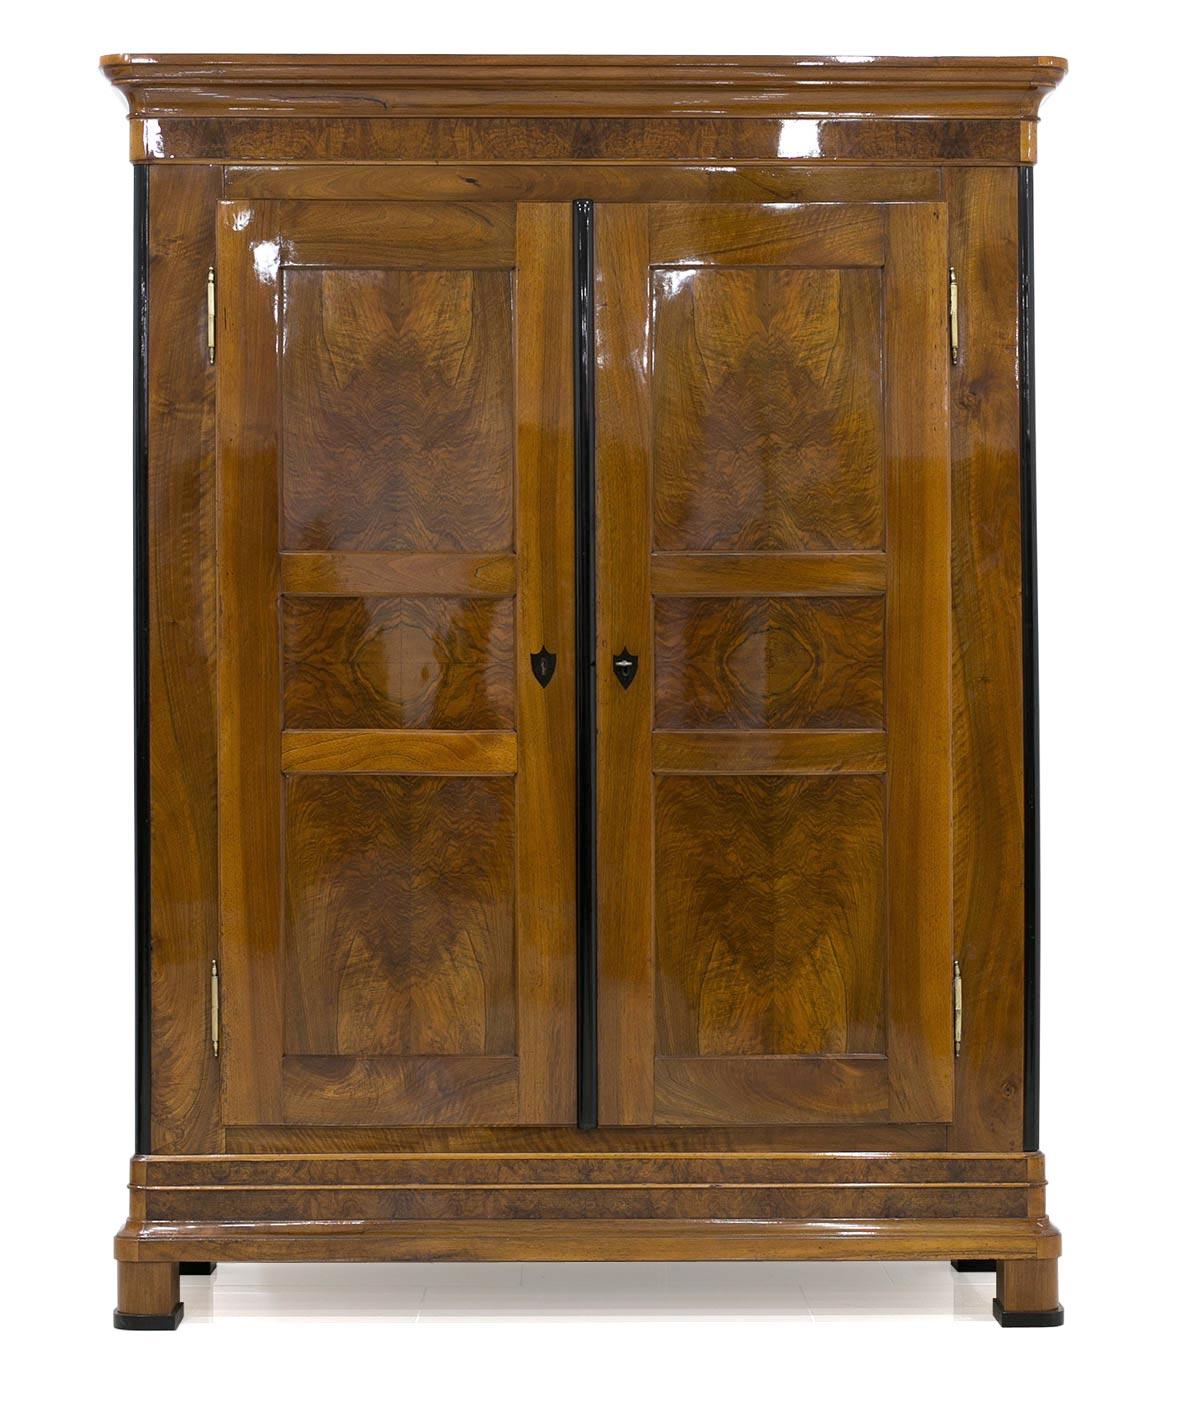 Beautiful, original Biedermeier wardrobe made of walnut wood, panel door and sides, also veneered with walnut. Surface finished with hand-applied polishes. The wardrobe comes from western Europe, probably Germany from circa 1830. The original